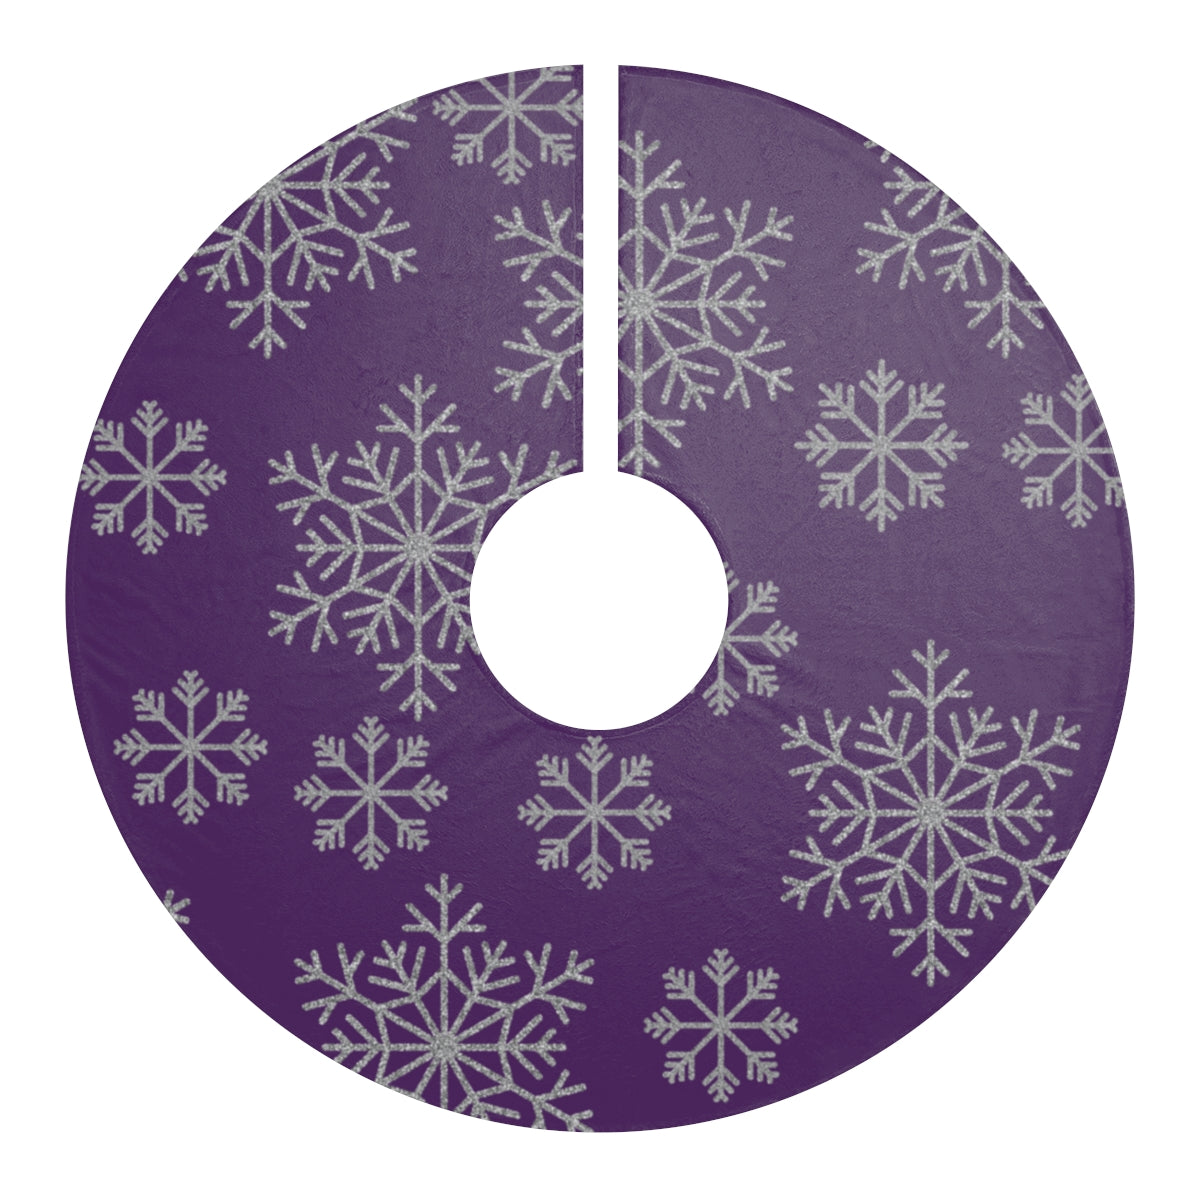 christmas tree skirt in purple color with silver snowflakes